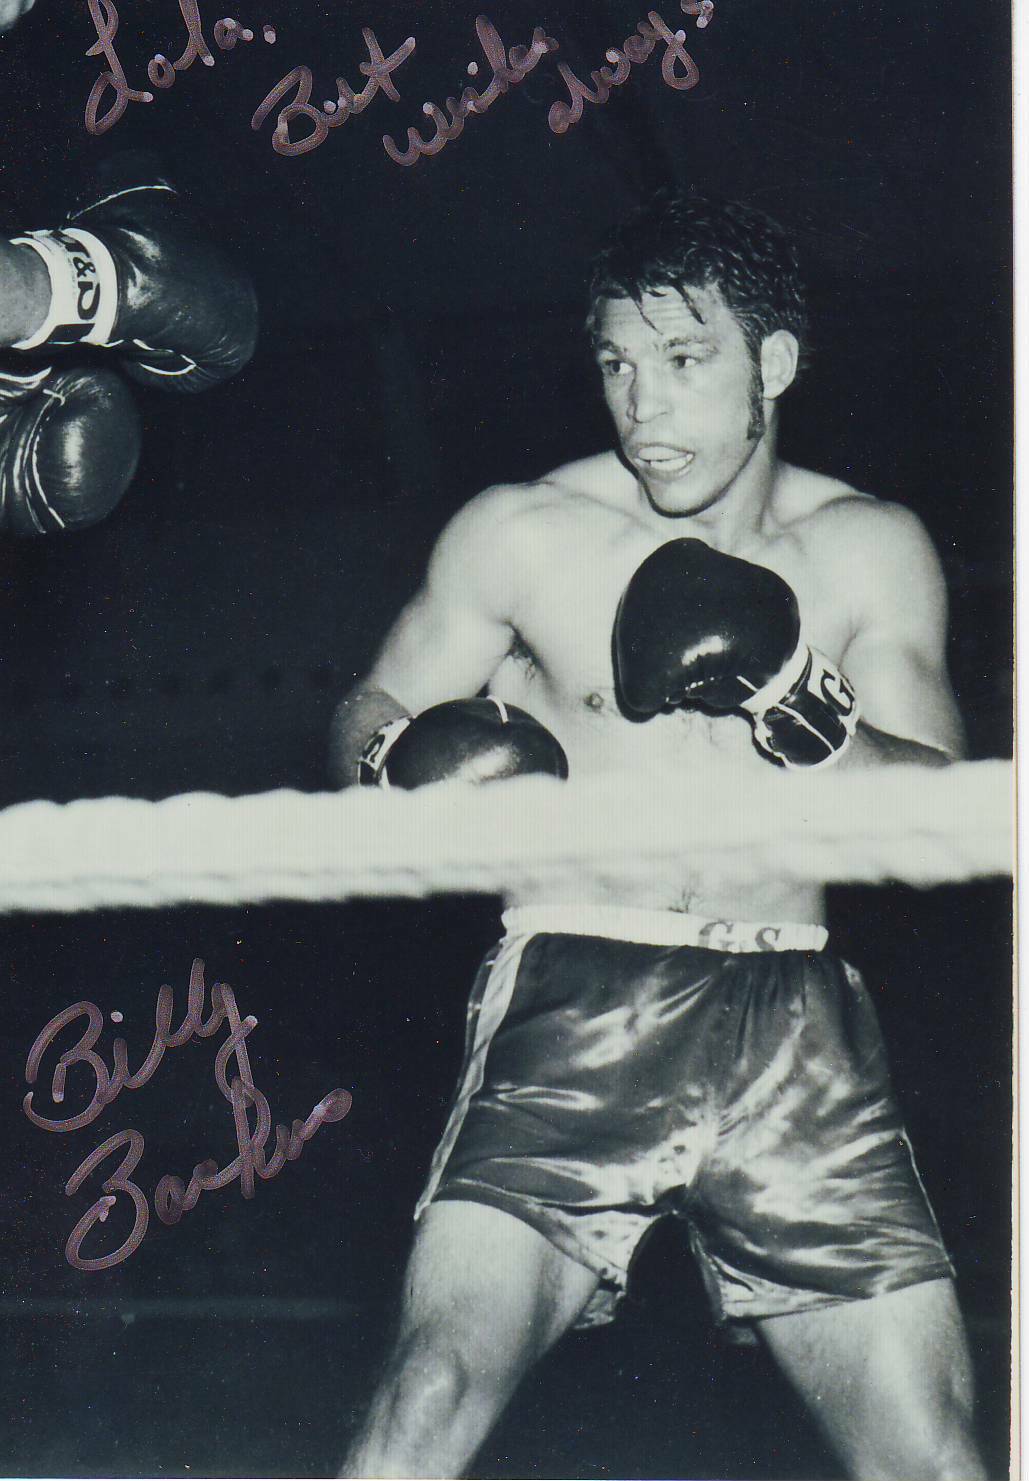 Billy Backus (9X12 cm) Original Autographed Photo Poster painting